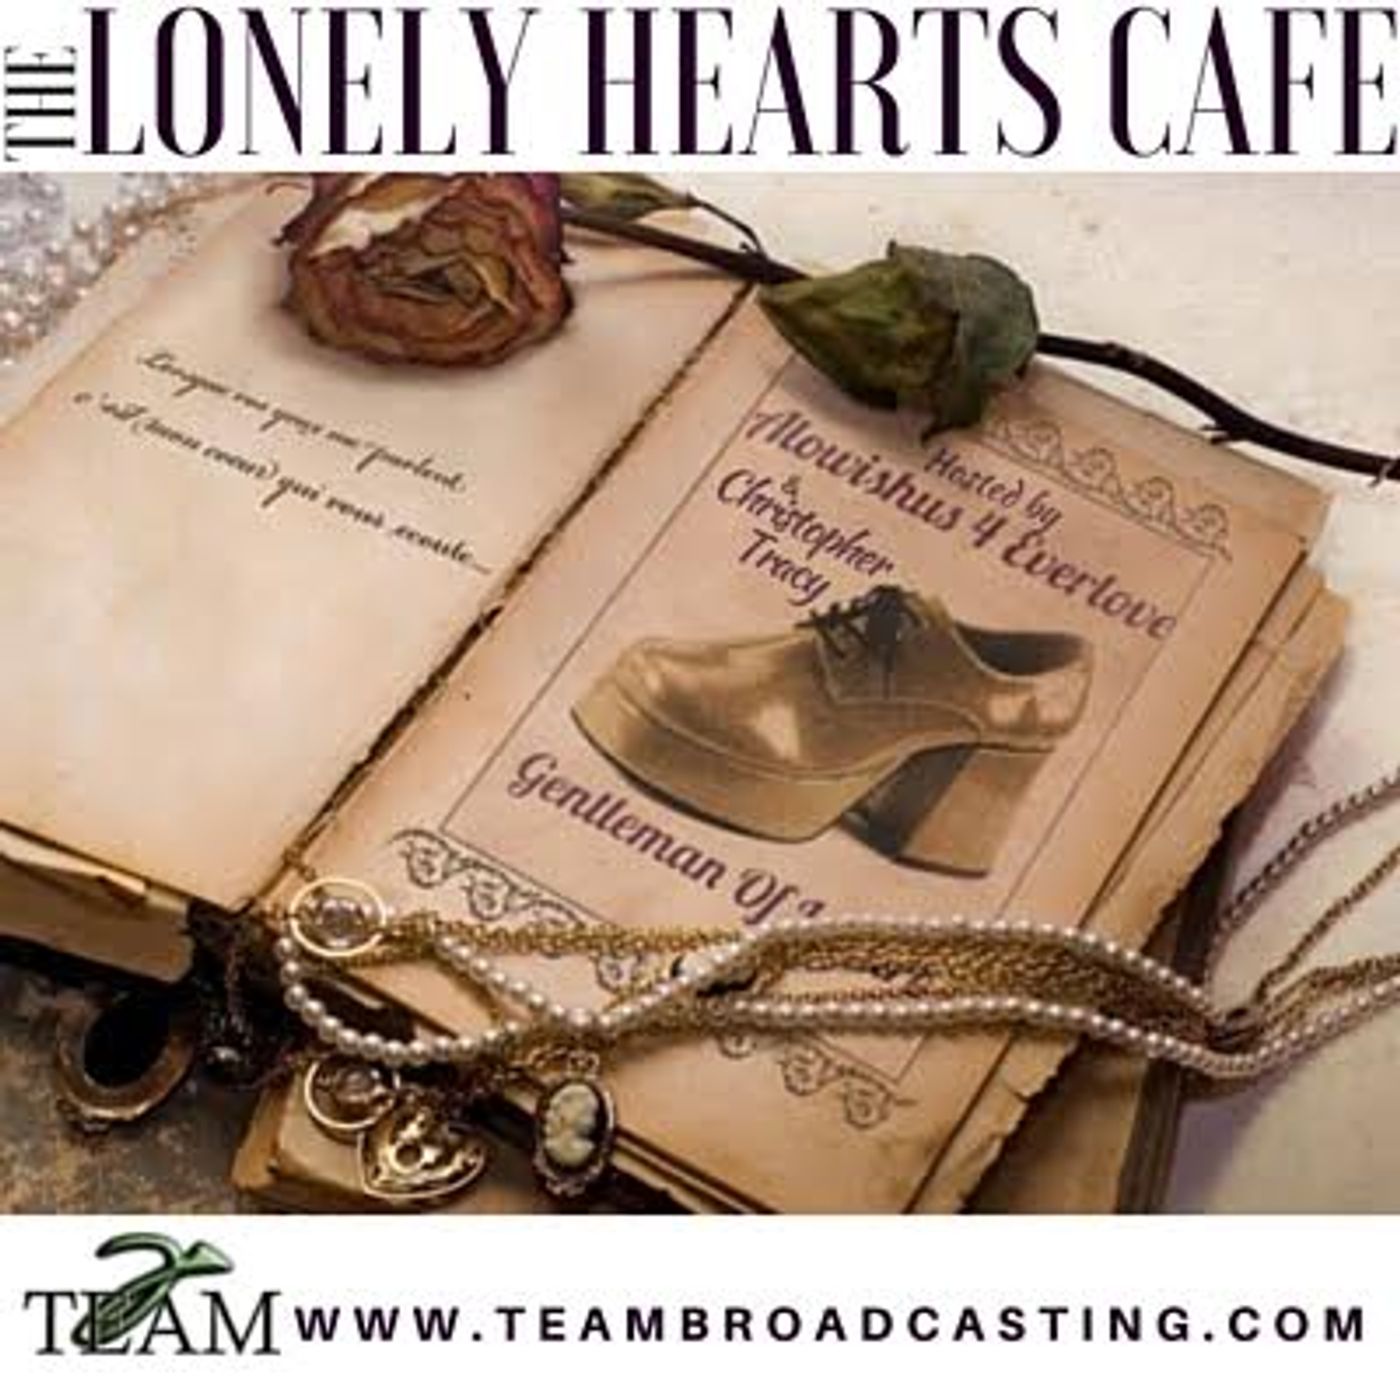 The Lonely Hearts Cafe